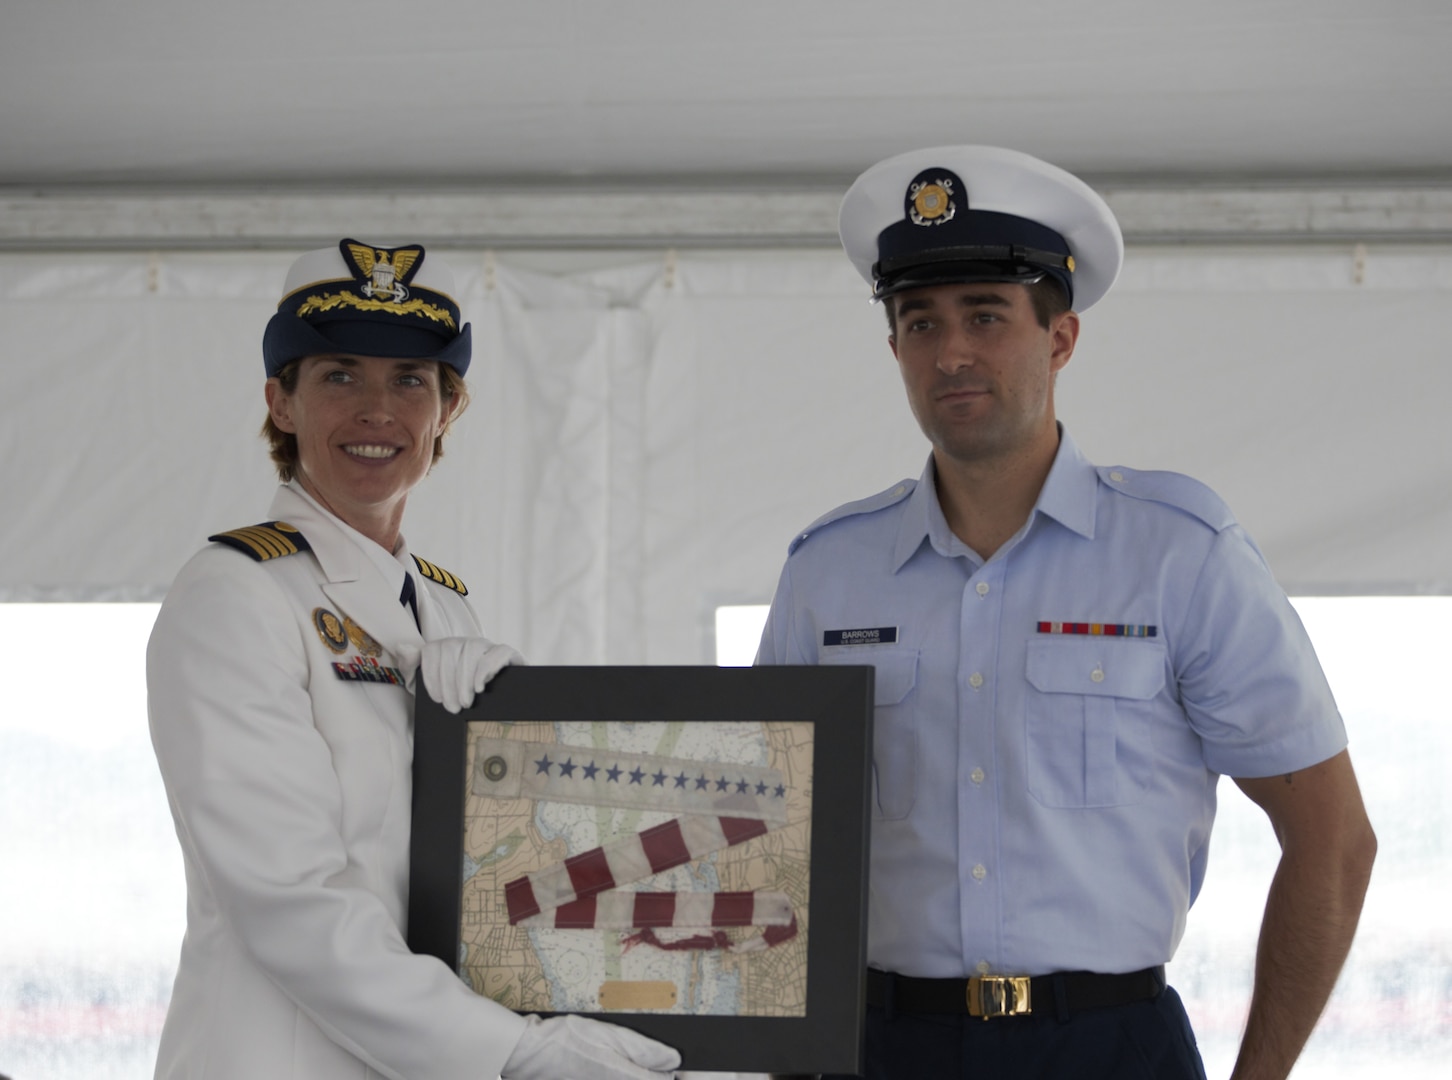 U.S. Coast Guard Capt. Anne O’Connell, left, out-going commanding officer of the USCGC Campbell (WMEC 909) receives the commissioning pennant that was flown on the mast during her time as commanding officer by crew member, Fireman Joseph Barrows, during a change of command ceremony, June 9, 2023, at Naval Station Newport. Rear Adm. Laura Dickey, deputy commander of Coast Guard Atlantic Area, presided over the ceremony. (U.S. Coast Guard photo by Petty Officer 2nd Class Eric Desirey)